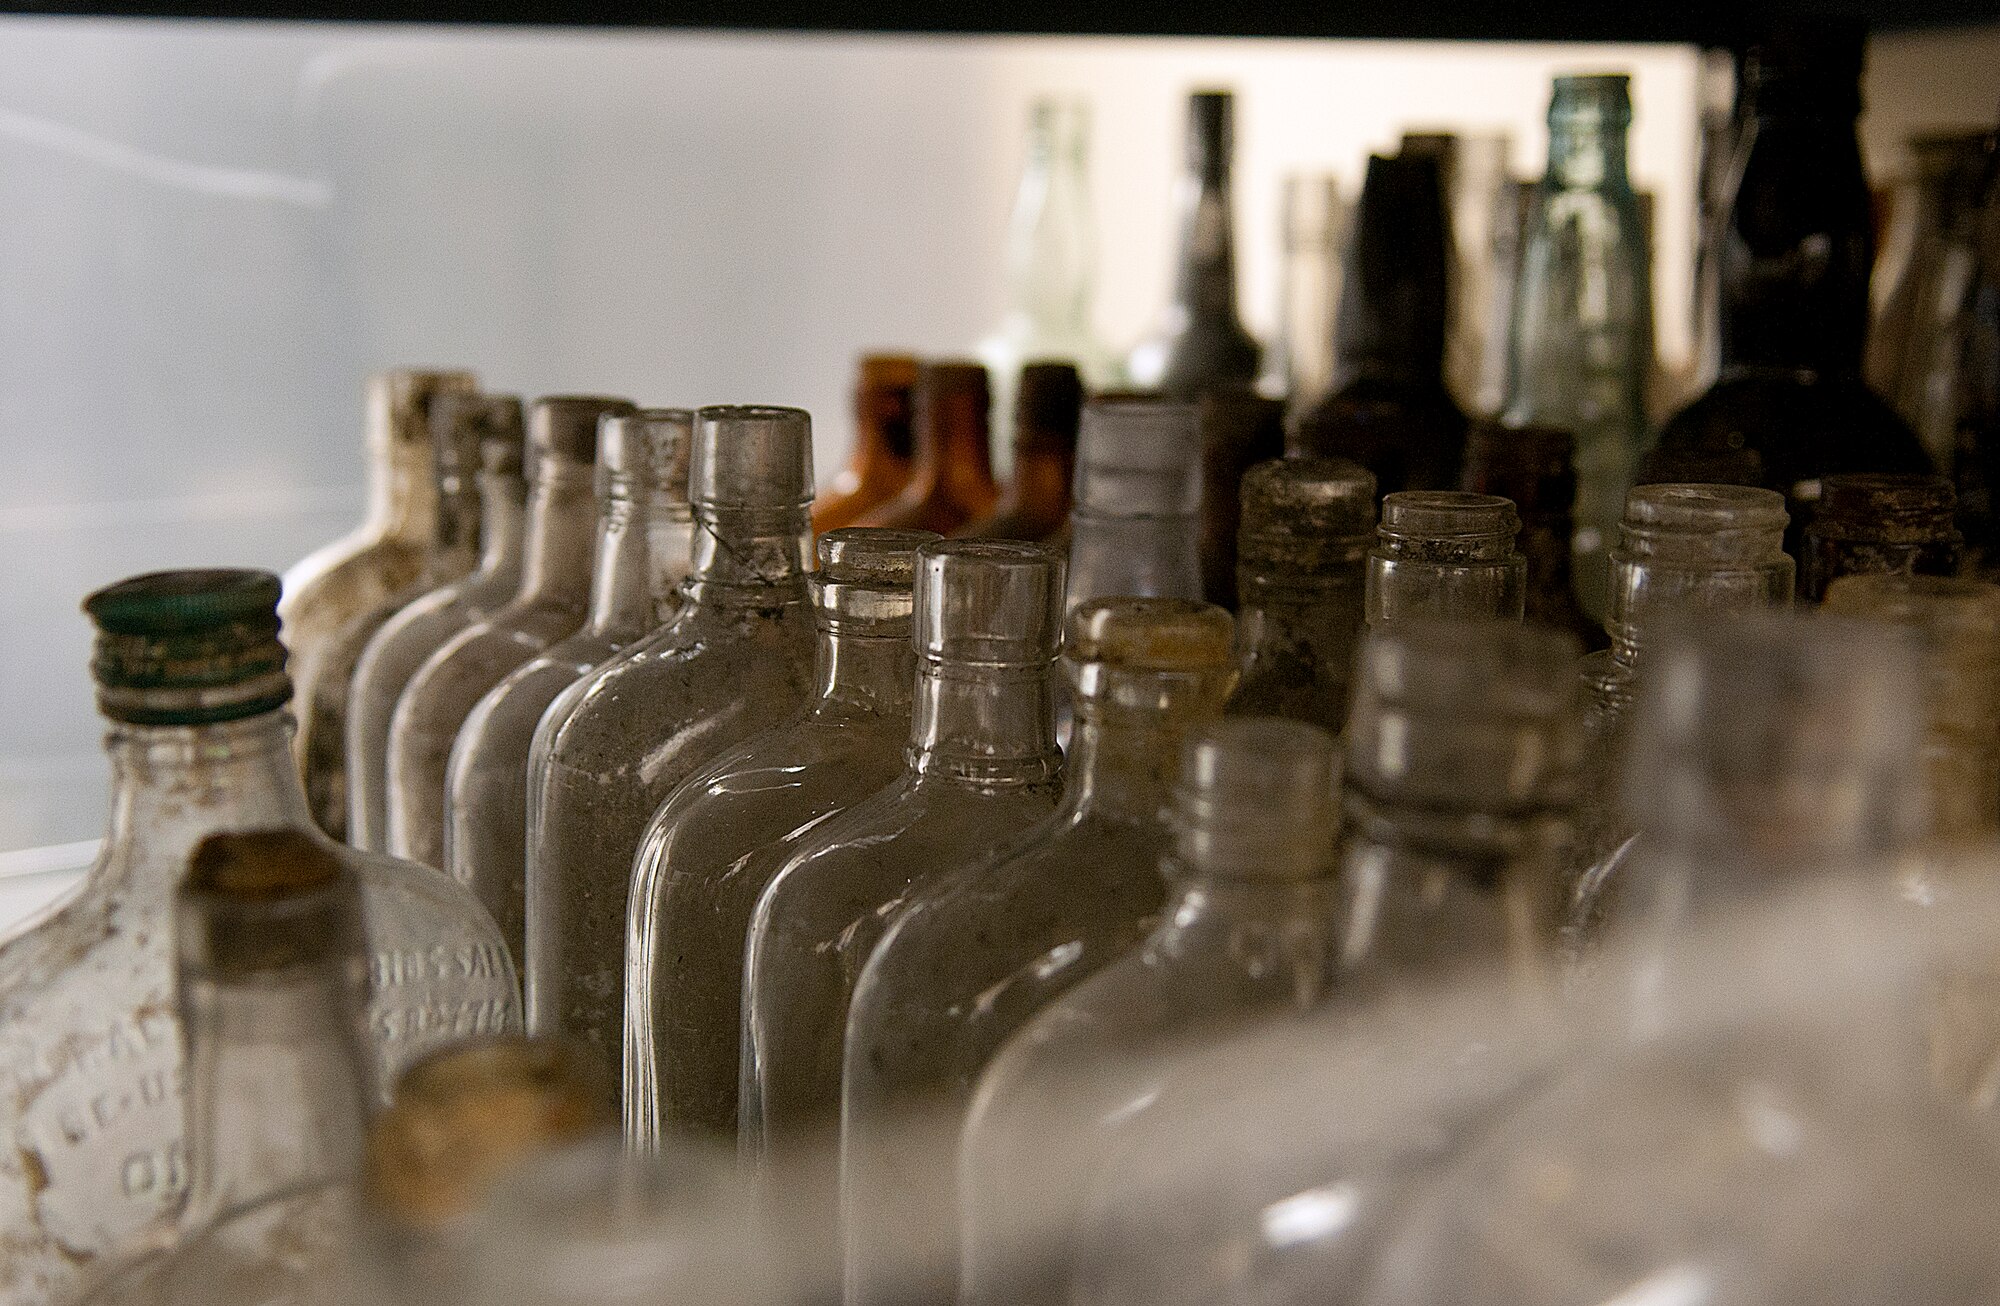 Rows of antique bottles line a shelf in the F. E. Warren Air Force Base curation facility known as “the bunker.” Artifacts from the approximately 200 archeological digs on the base are stored in the climate controlled facility. (U.S. Air Force photo by R.J. Oriez)